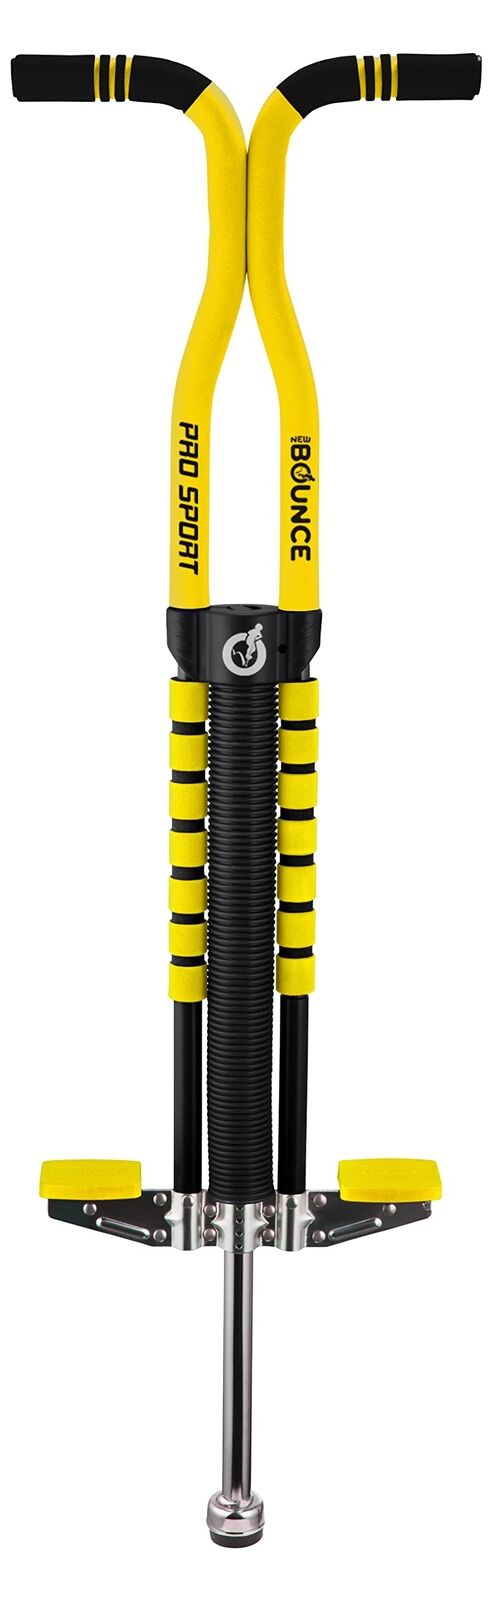 (New Bounce Soft) New Bounce Soft Easy Grip Pro Sports Pogo Stick for ages 9 and